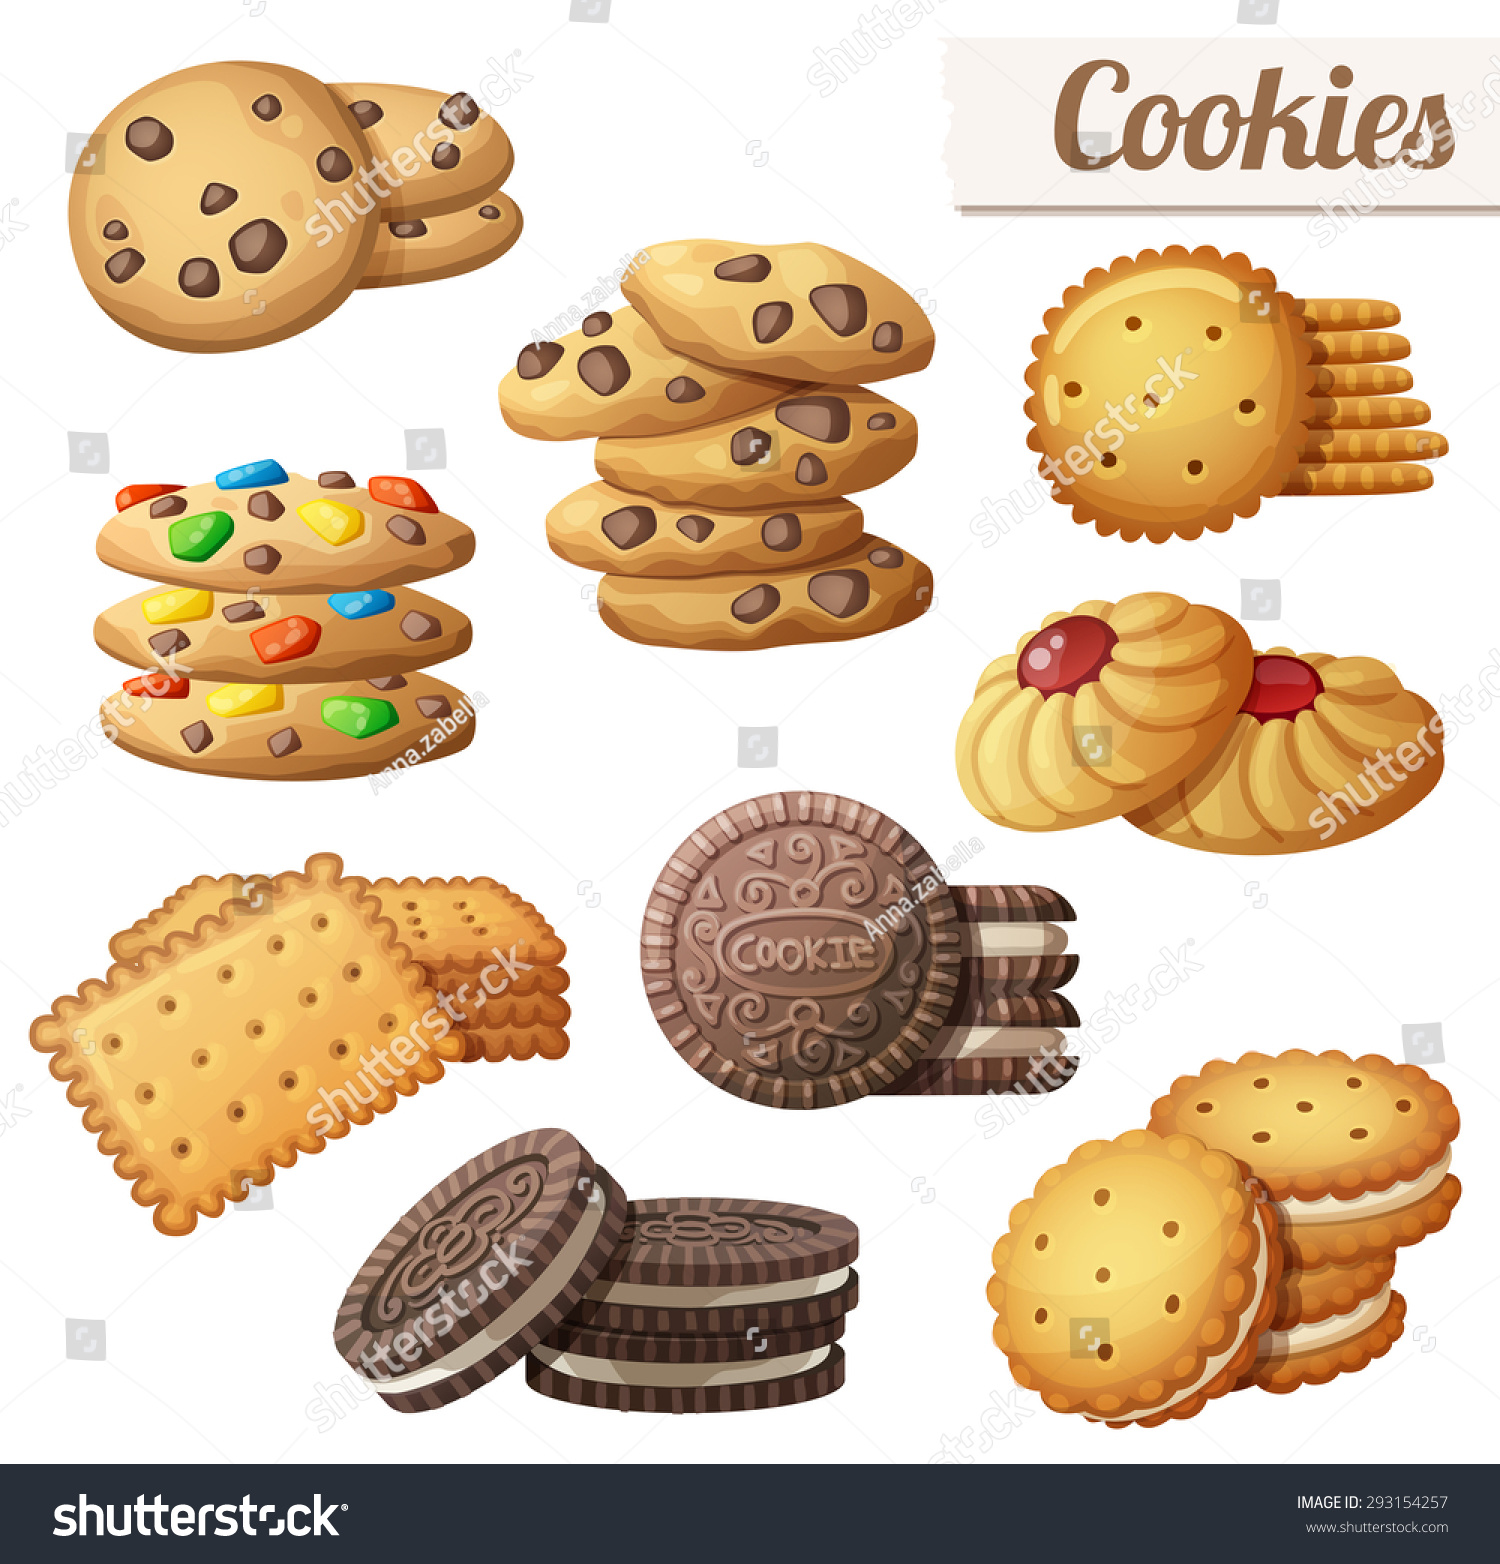 SVG of Cookies. Set of cartoon vector food icons isolated on white background svg